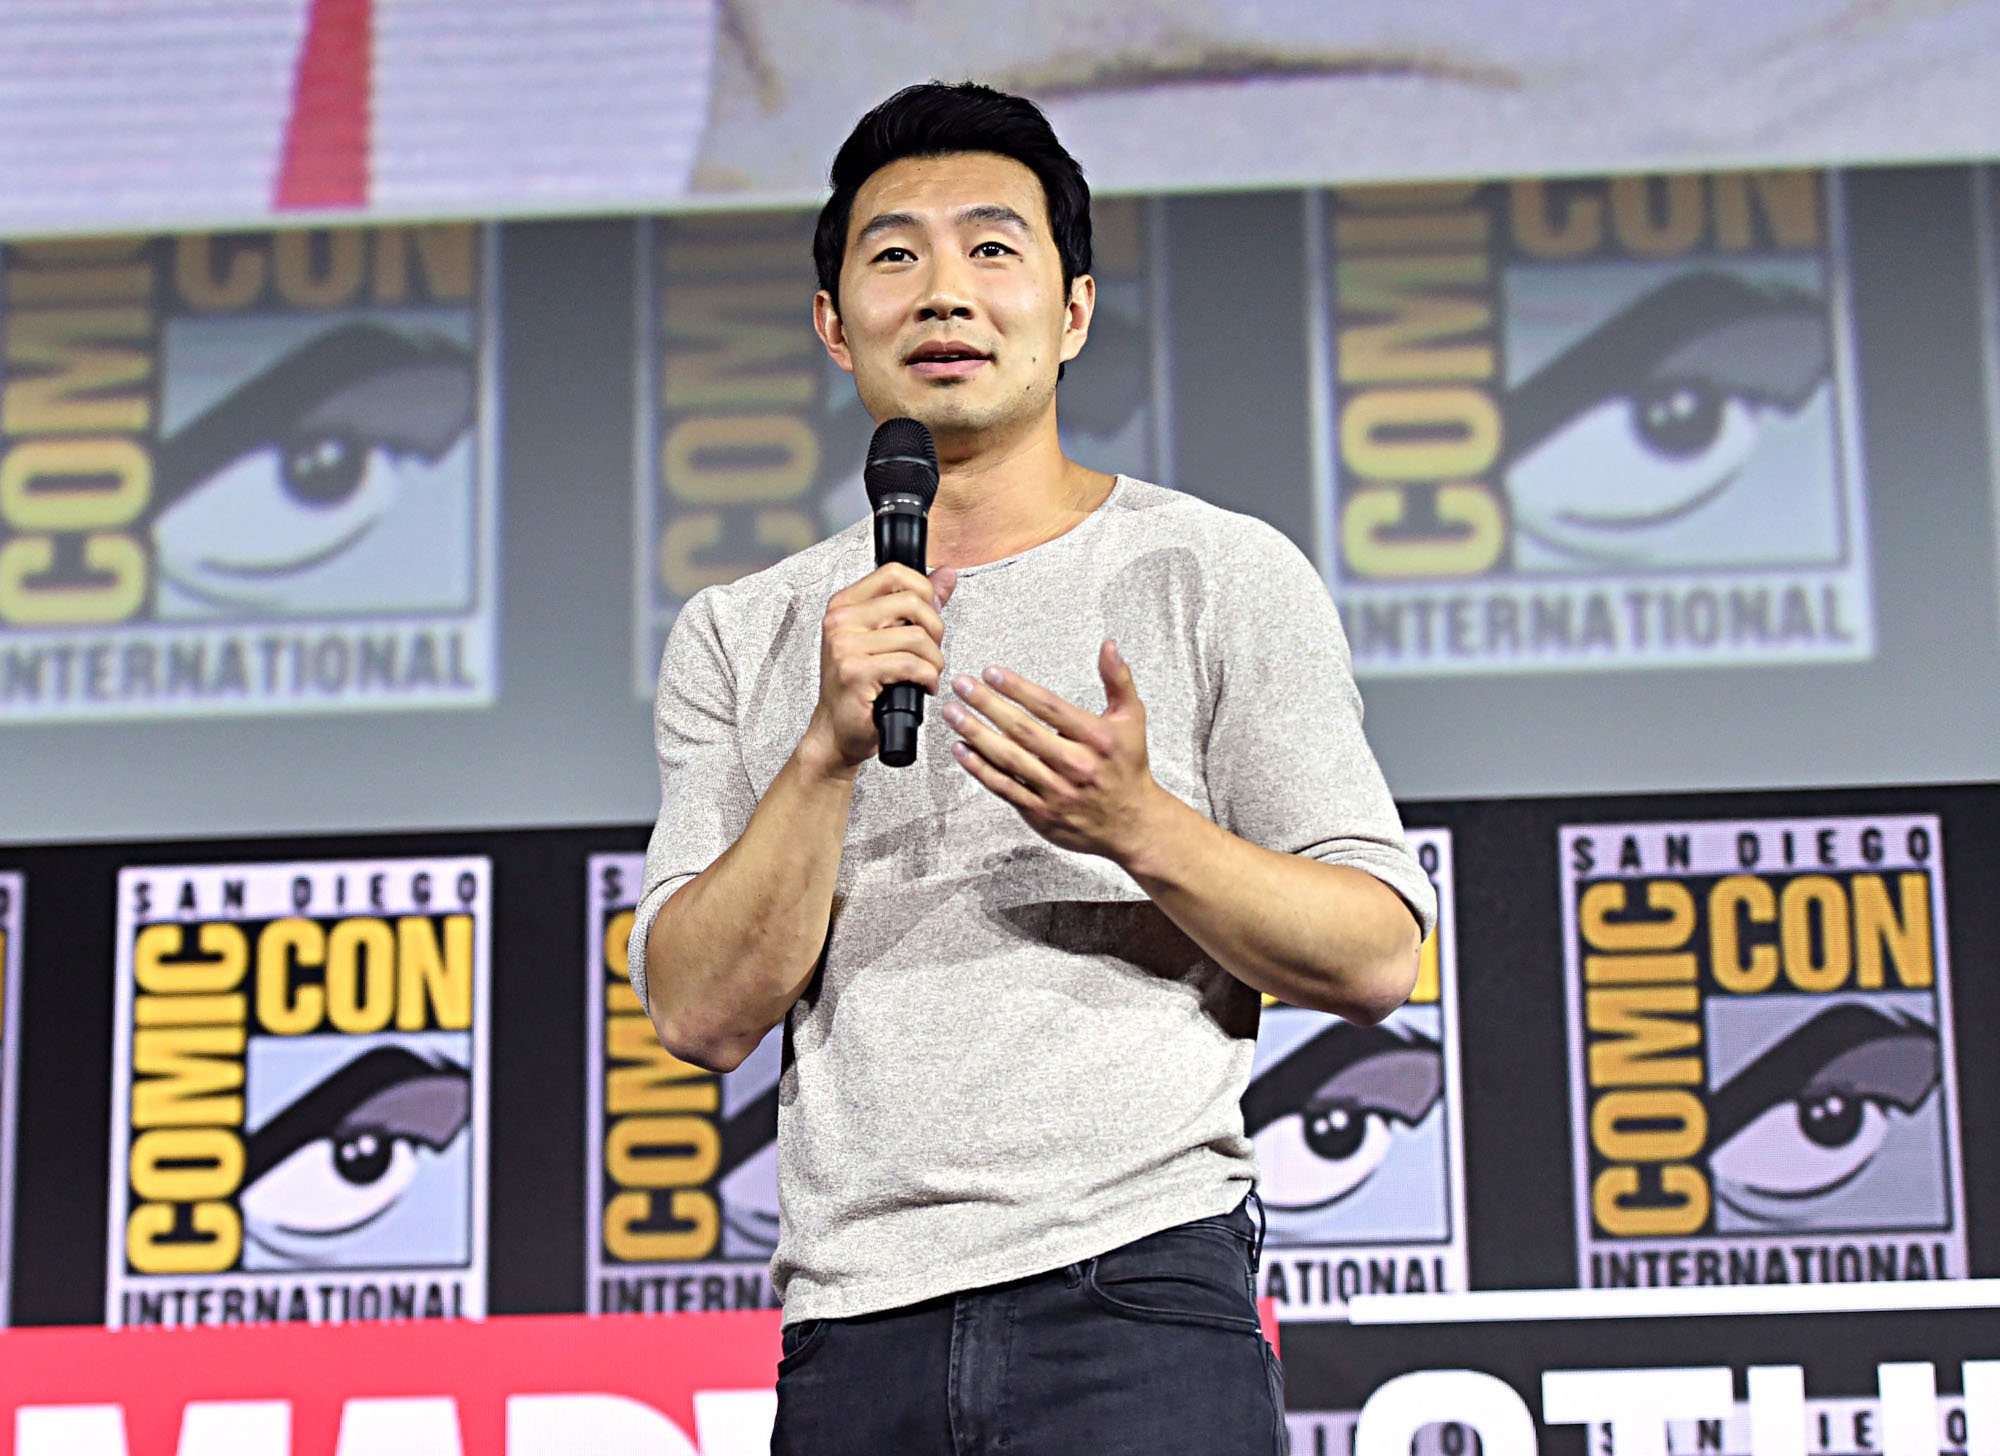 'Shang-Chi and the Legend of the Ten Rings' star Simu Liu wearing a grey shirt and jeans, holding a microphone, and standing in front of a Comic-Con wall